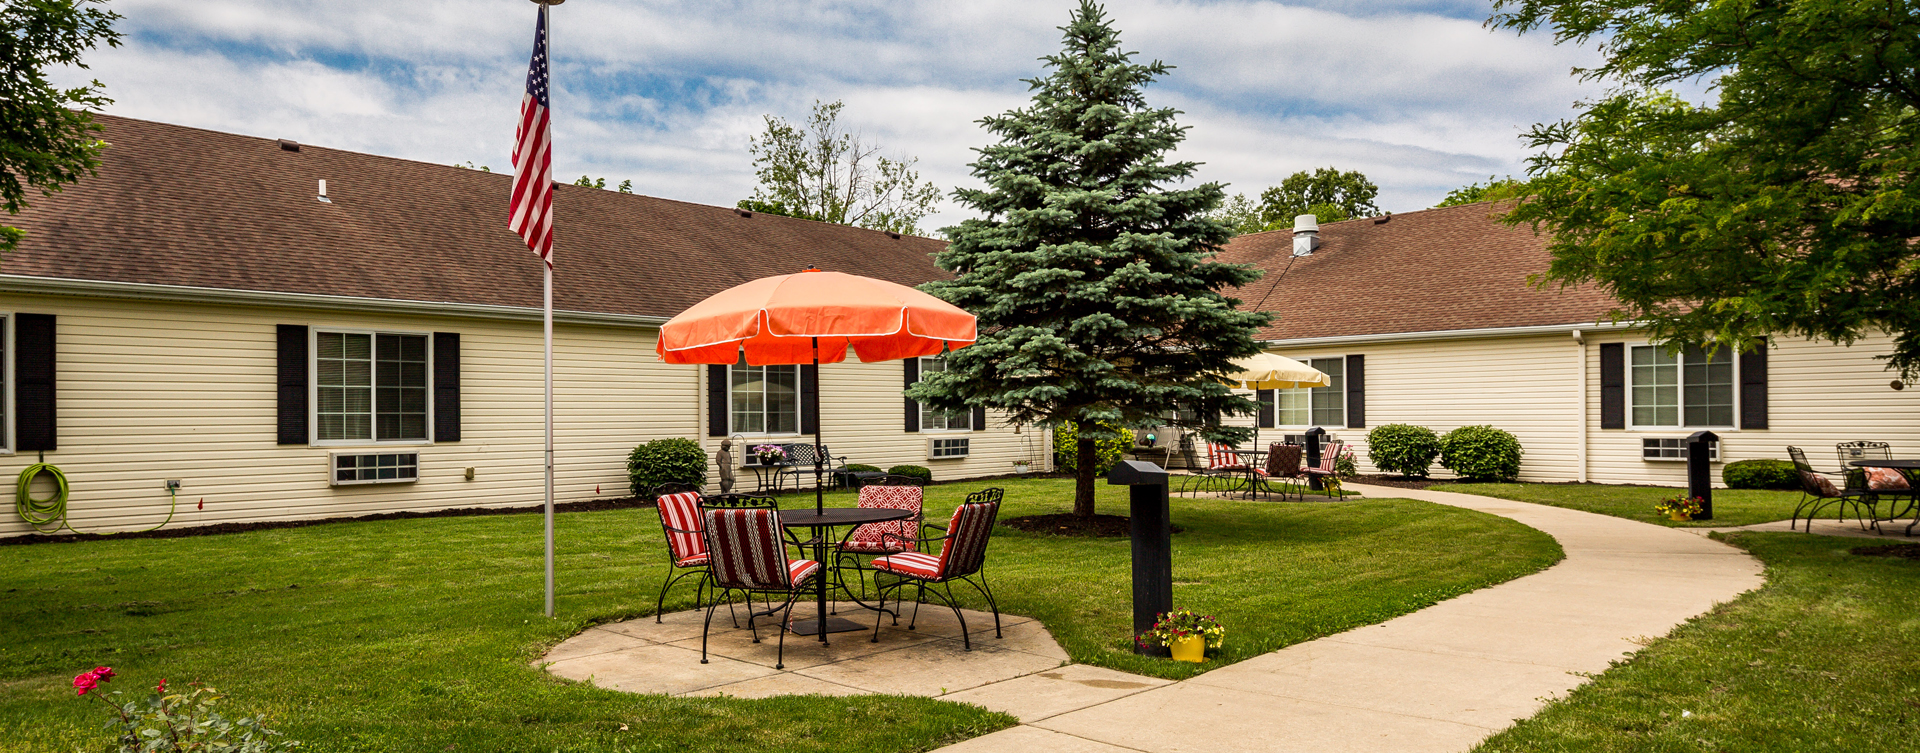 Enjoy bird watching, gardening and barbecuing in our courtyard at Bickford of Battle Creek